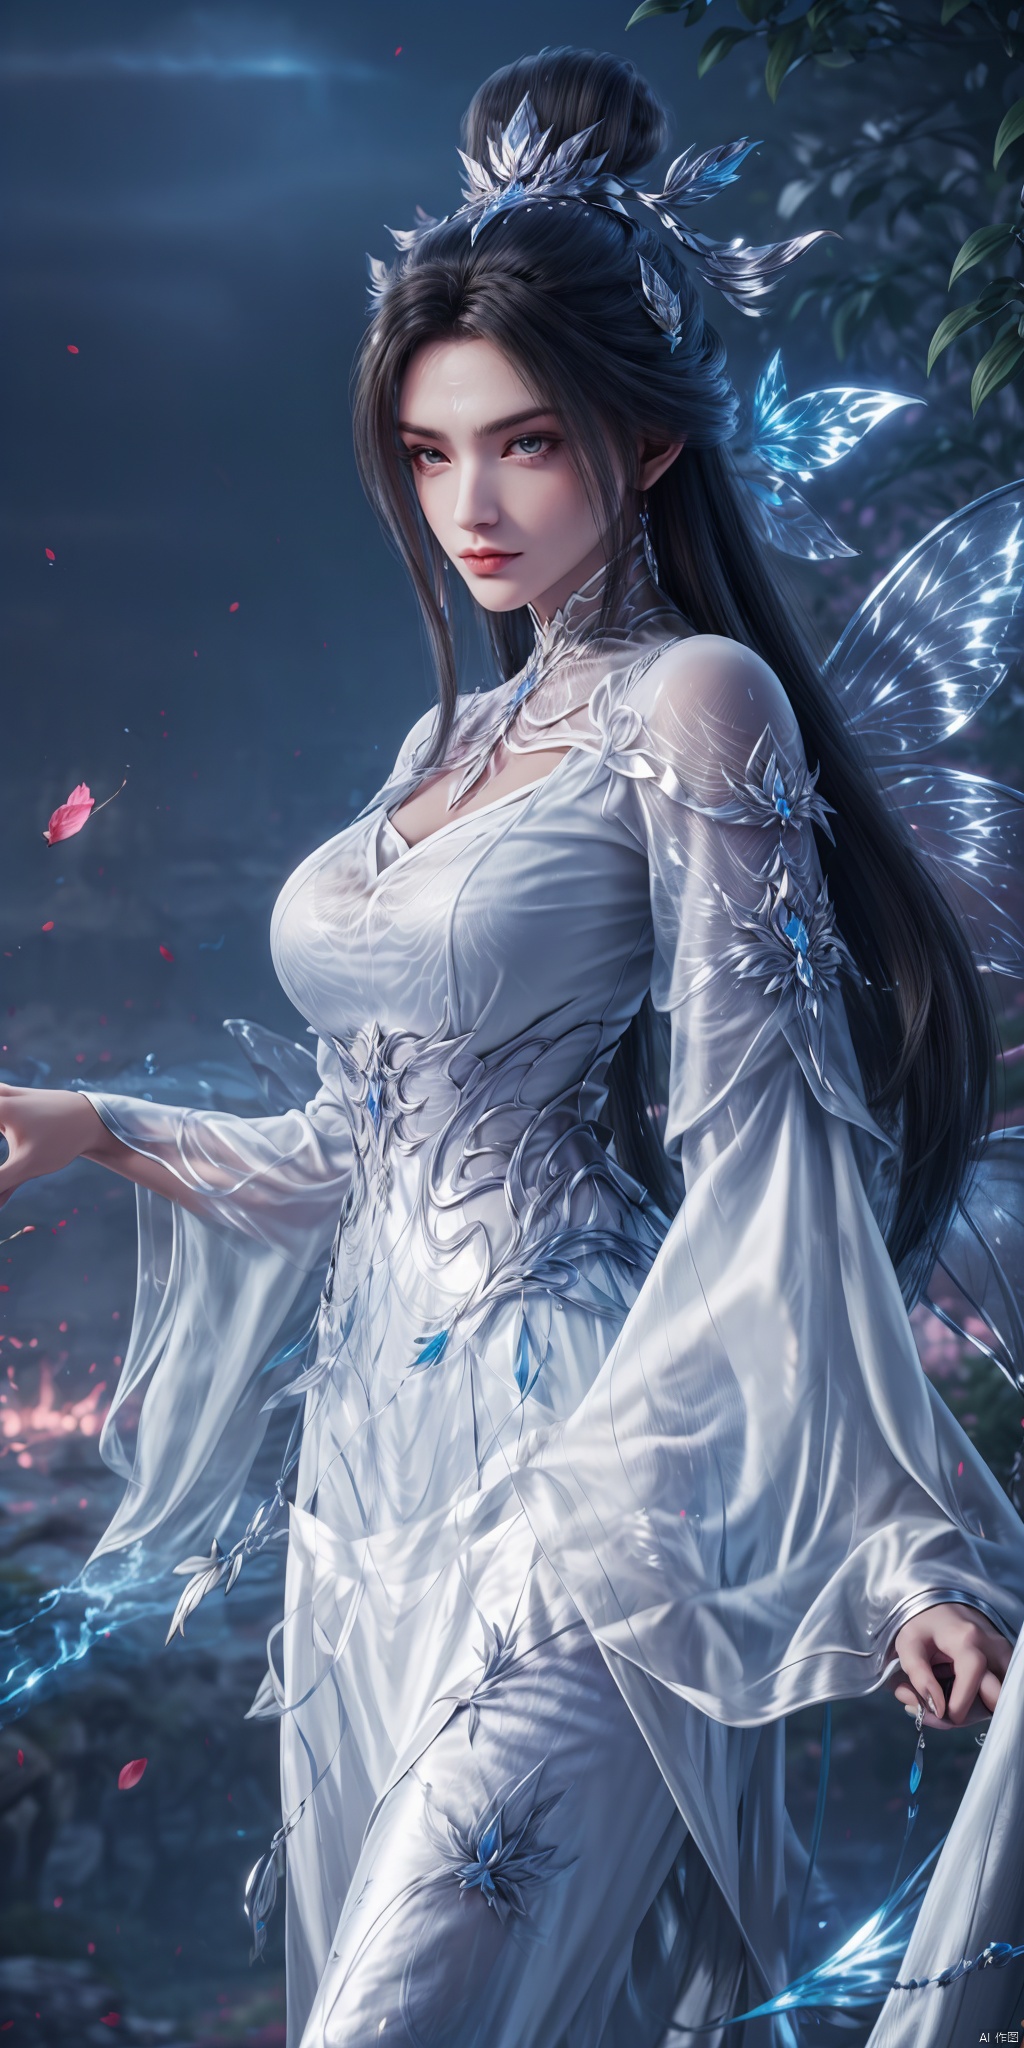  1 girl, single, long hair, hair accessories, jewelry, forehead print, long sleeves, (white woman: 1.3), fairy fluttering, (waist), antique beauty, (whole body: 1.2), standing, shooting from below, (hand details), big breasts.